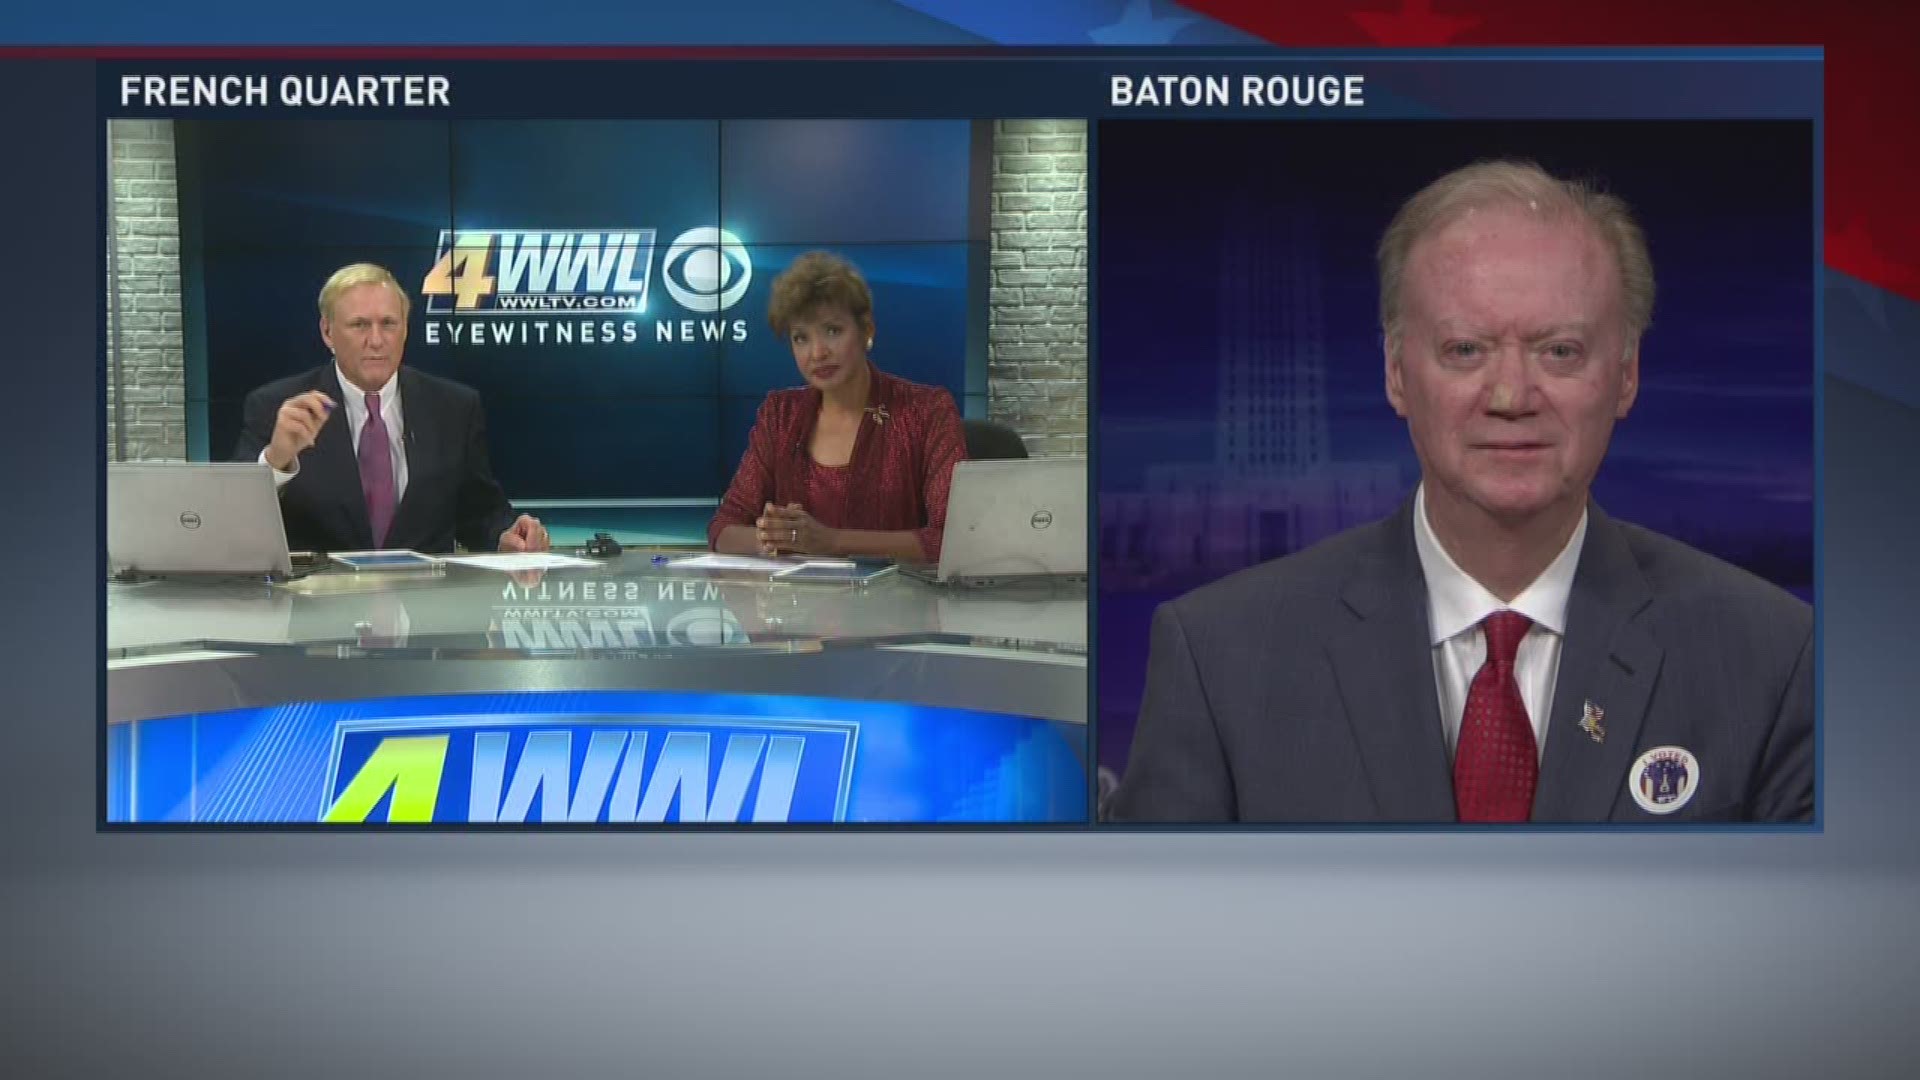 Louisiana's Secretary of State joins Eyewitness News Morning Edition to discuss Tuesday's election.